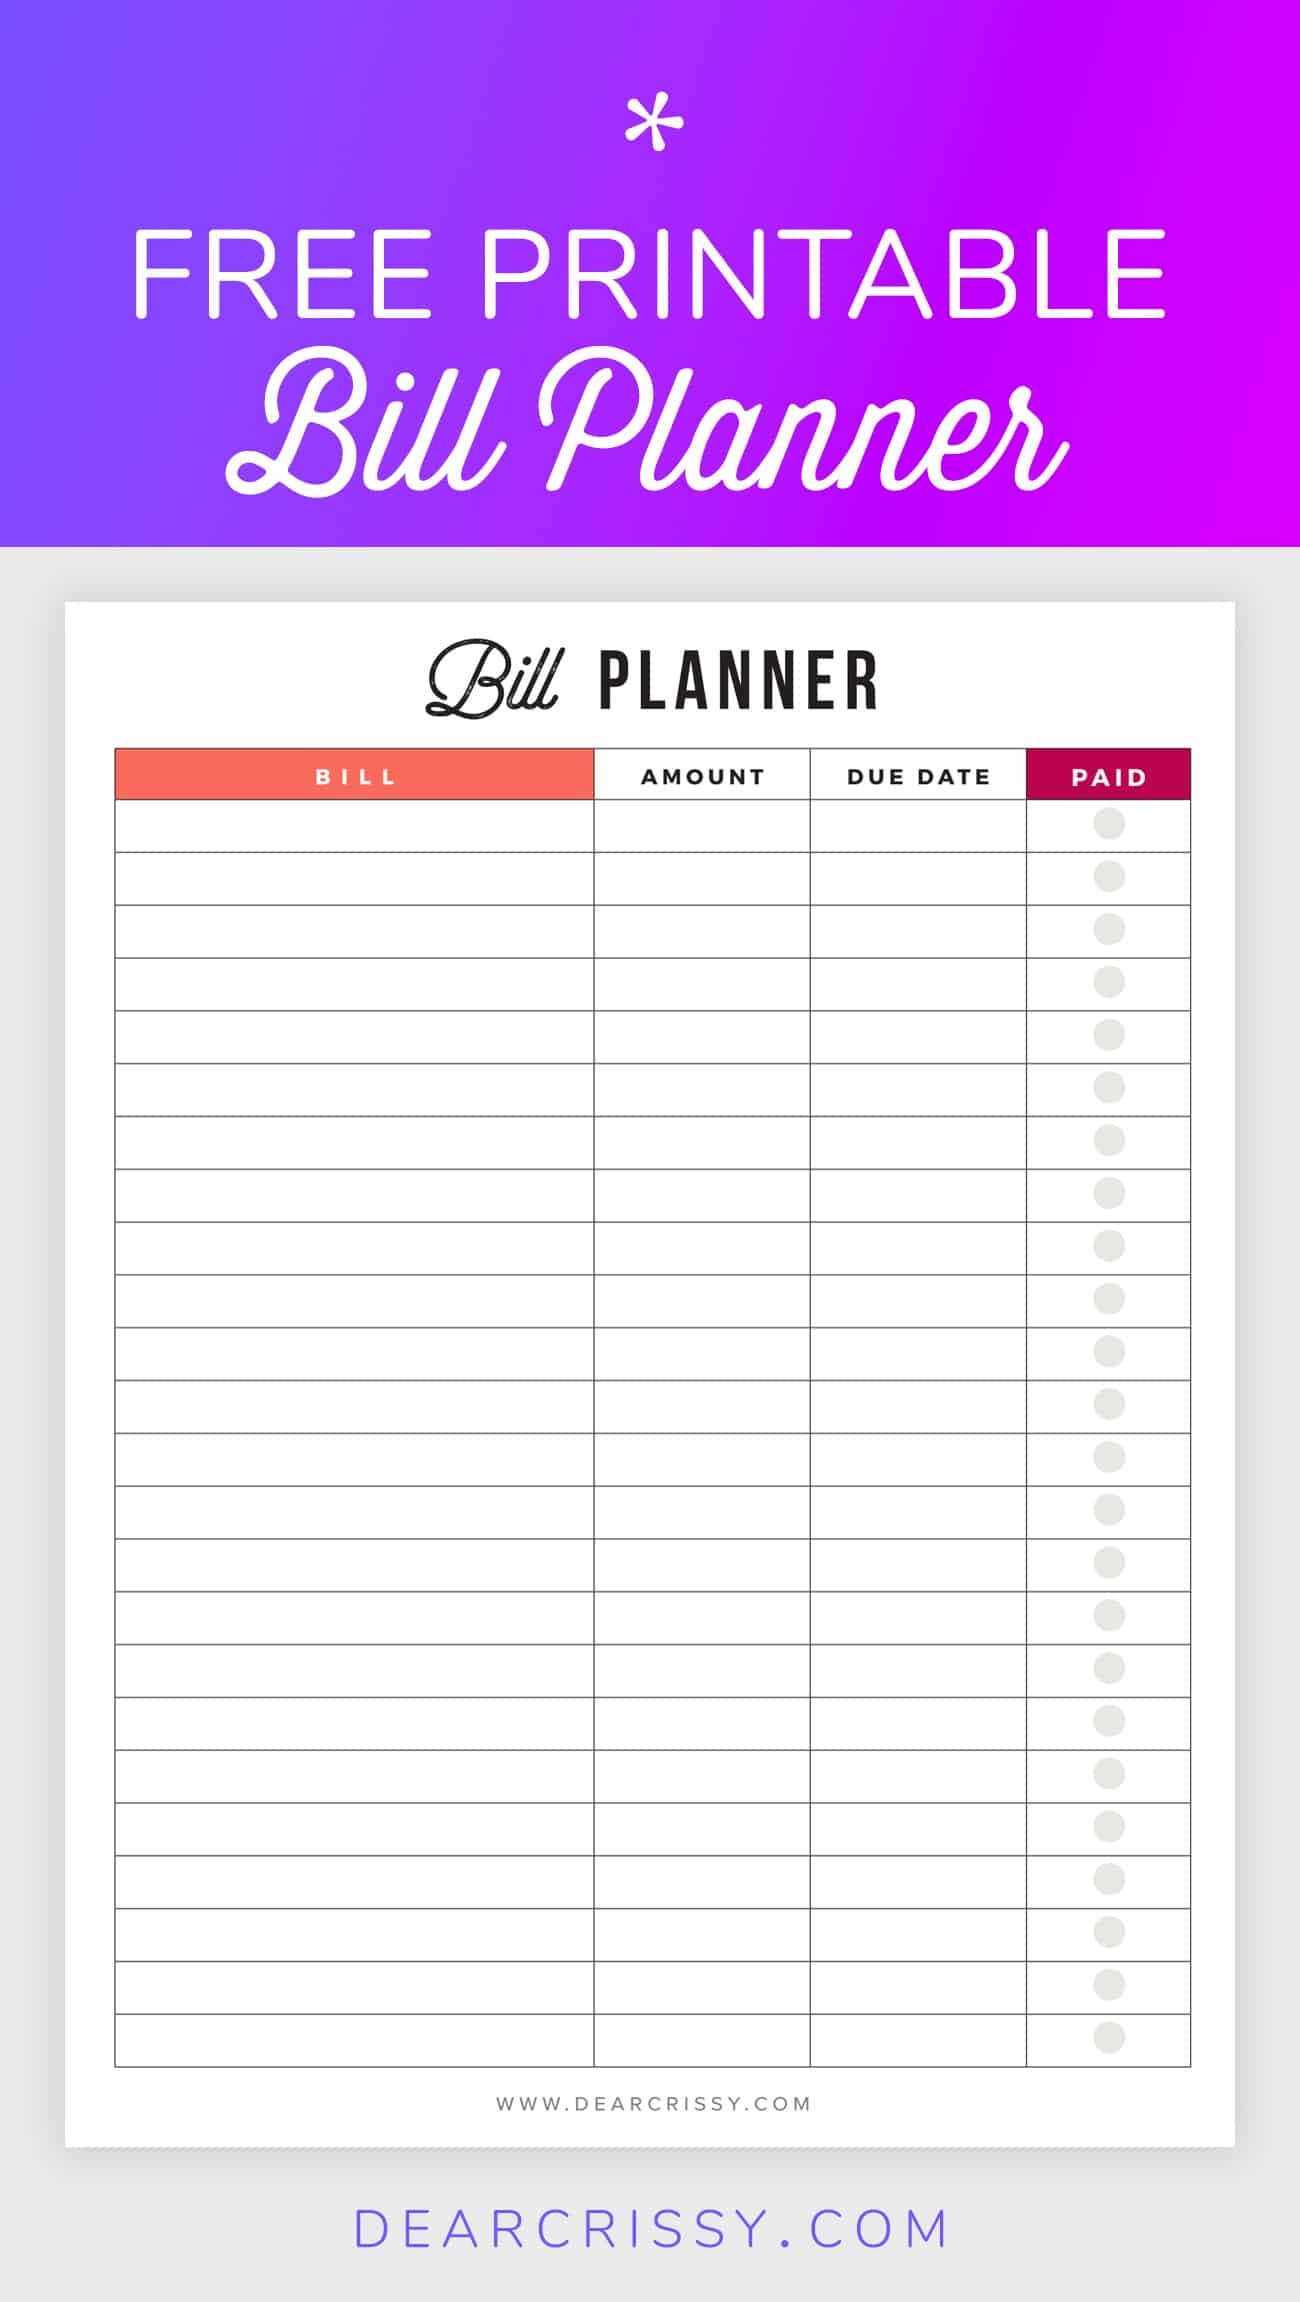 Bill Planner Printable - Pay Down Your Bills This Year! - Free Printable Bill Tracker